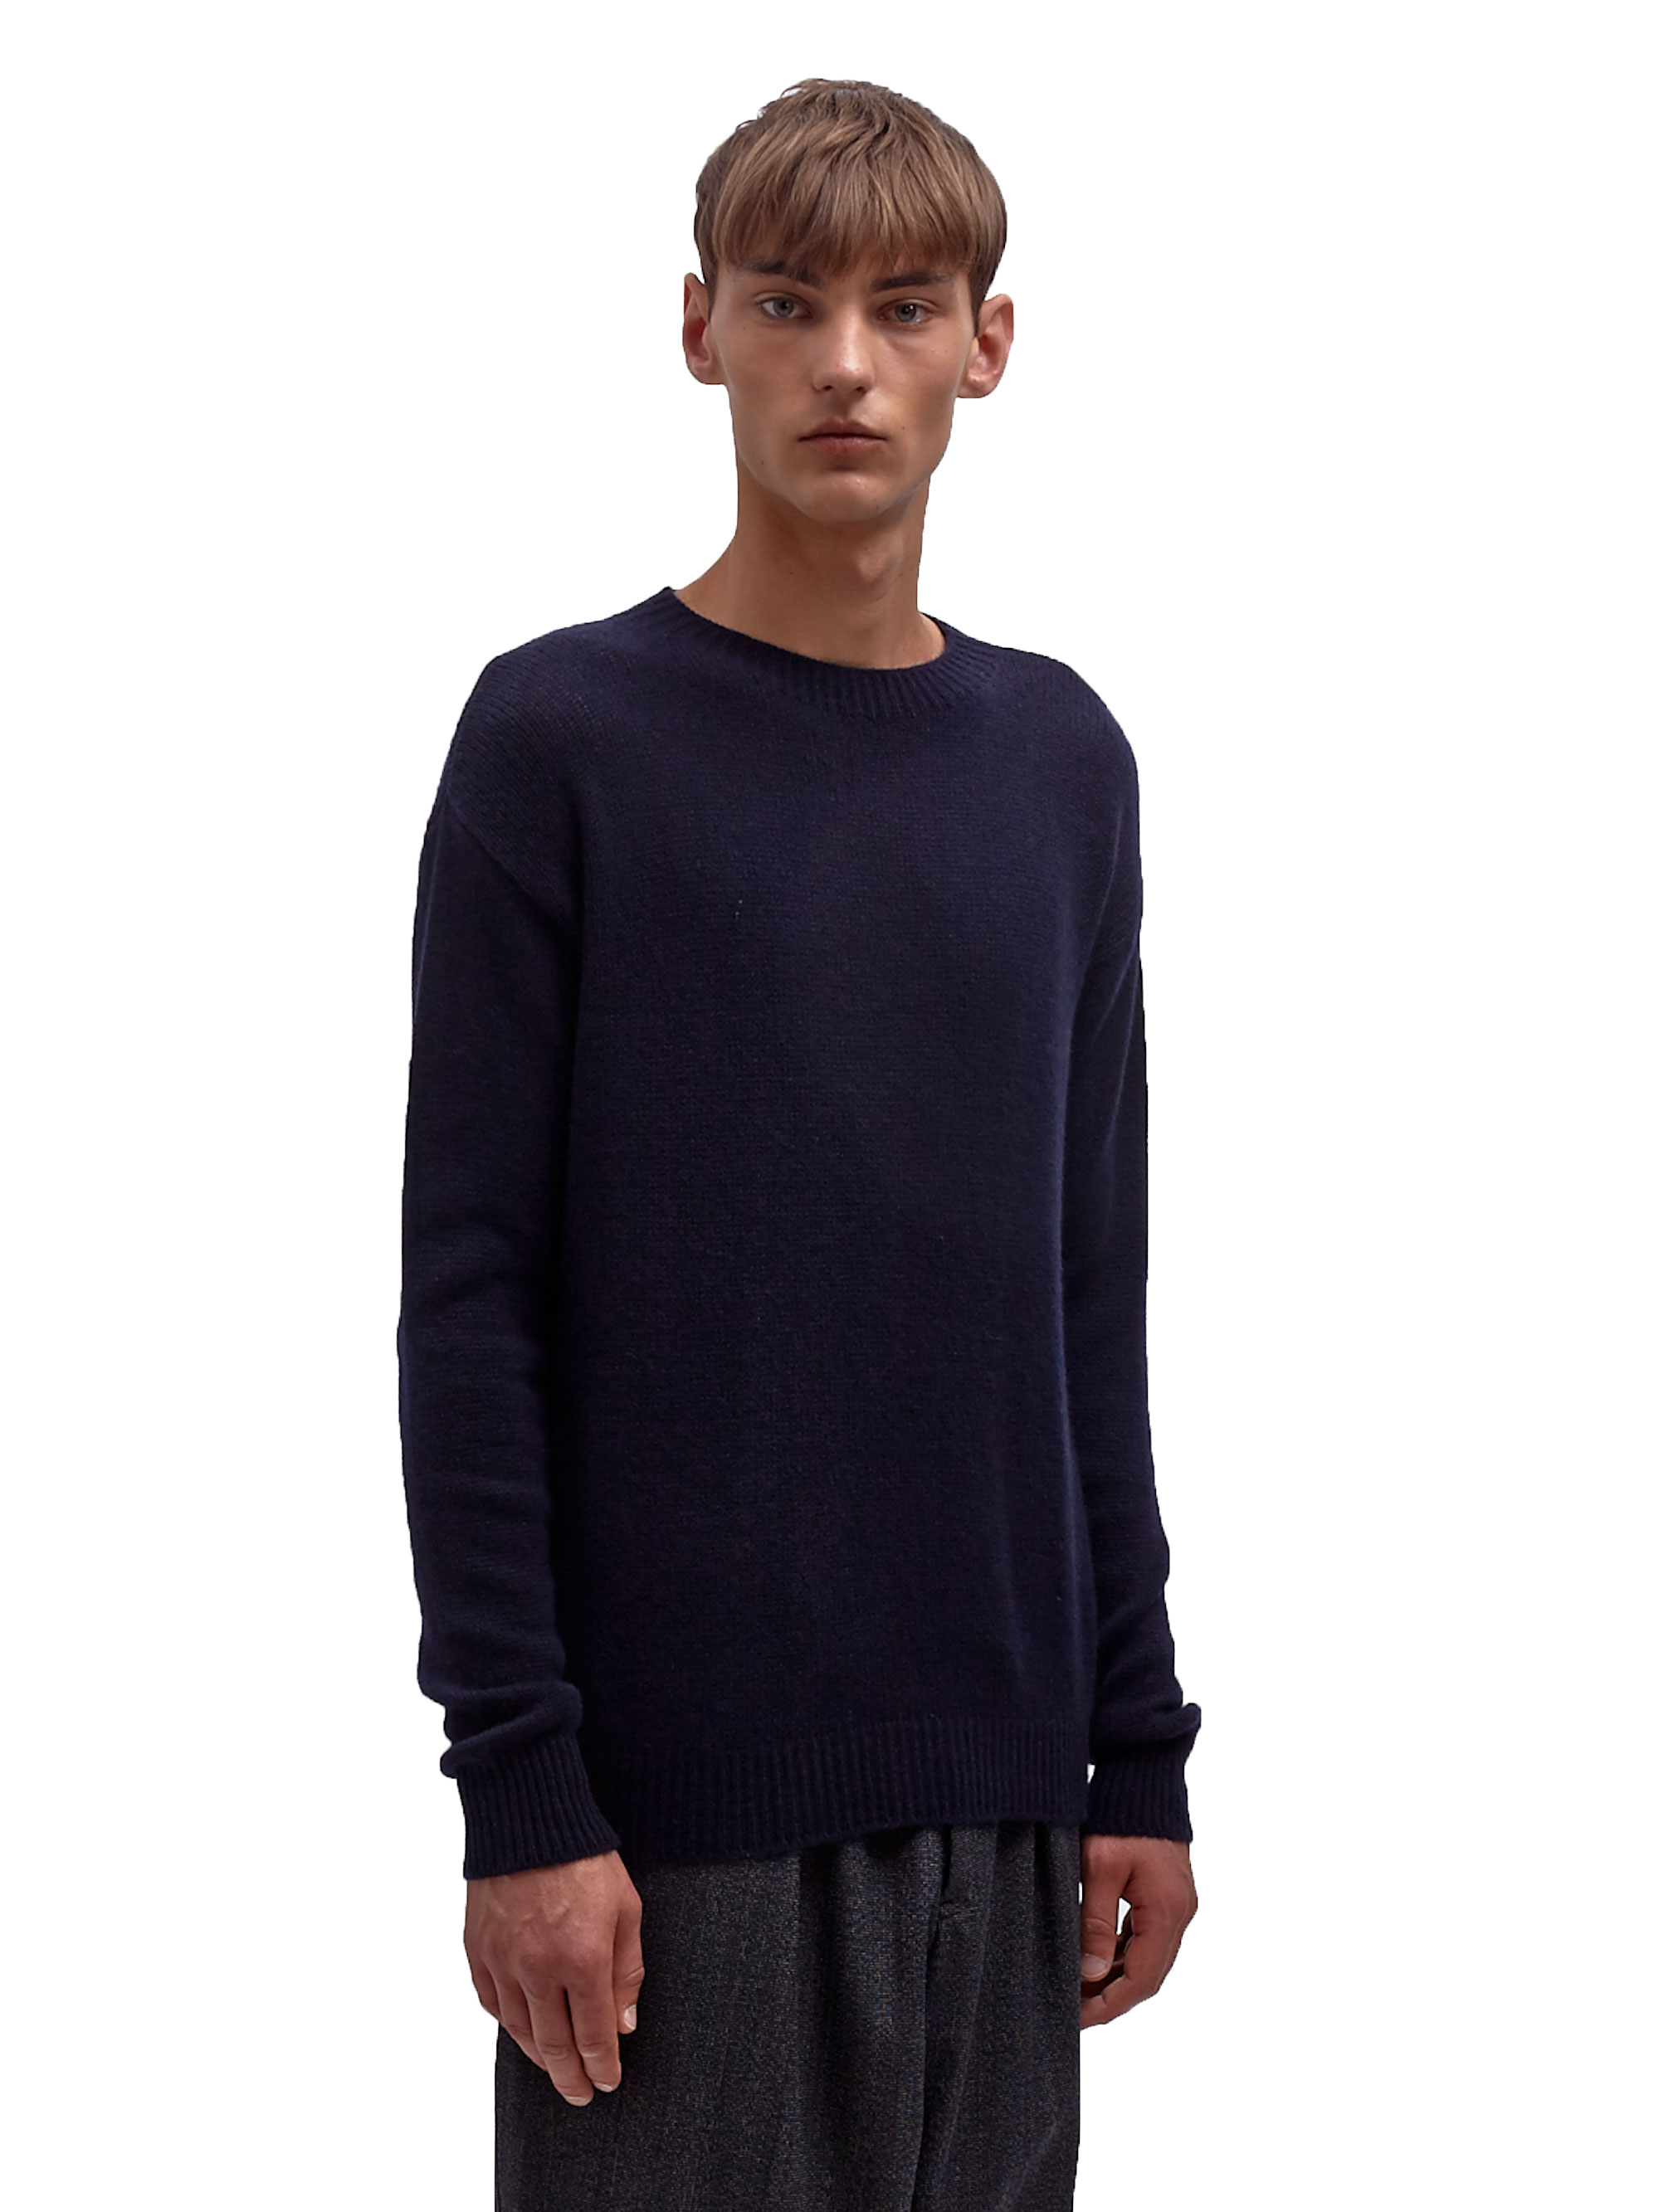 Lyst - Marni Mens Long Sleeved Crew Neck Cashmere Sweater in Blue for Men